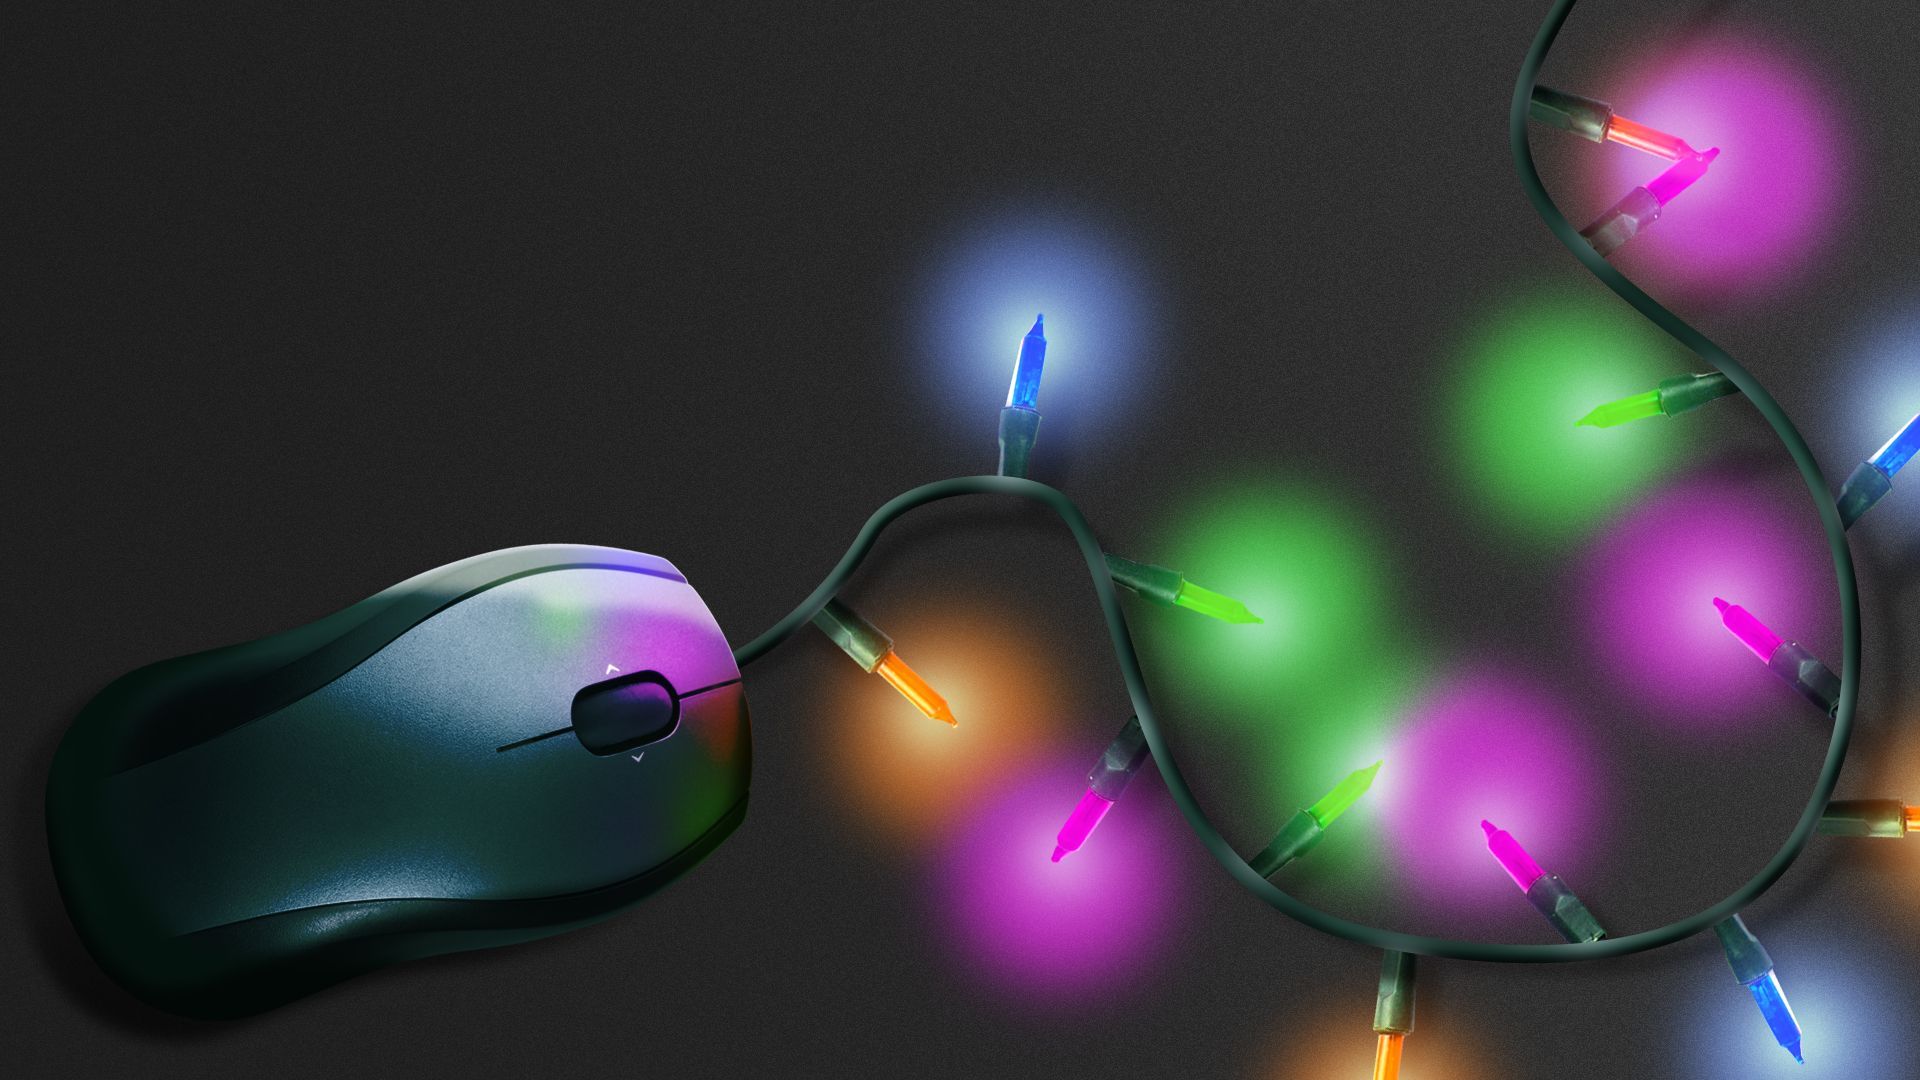 Illustration of a computer mouse with a cord of holiday lights